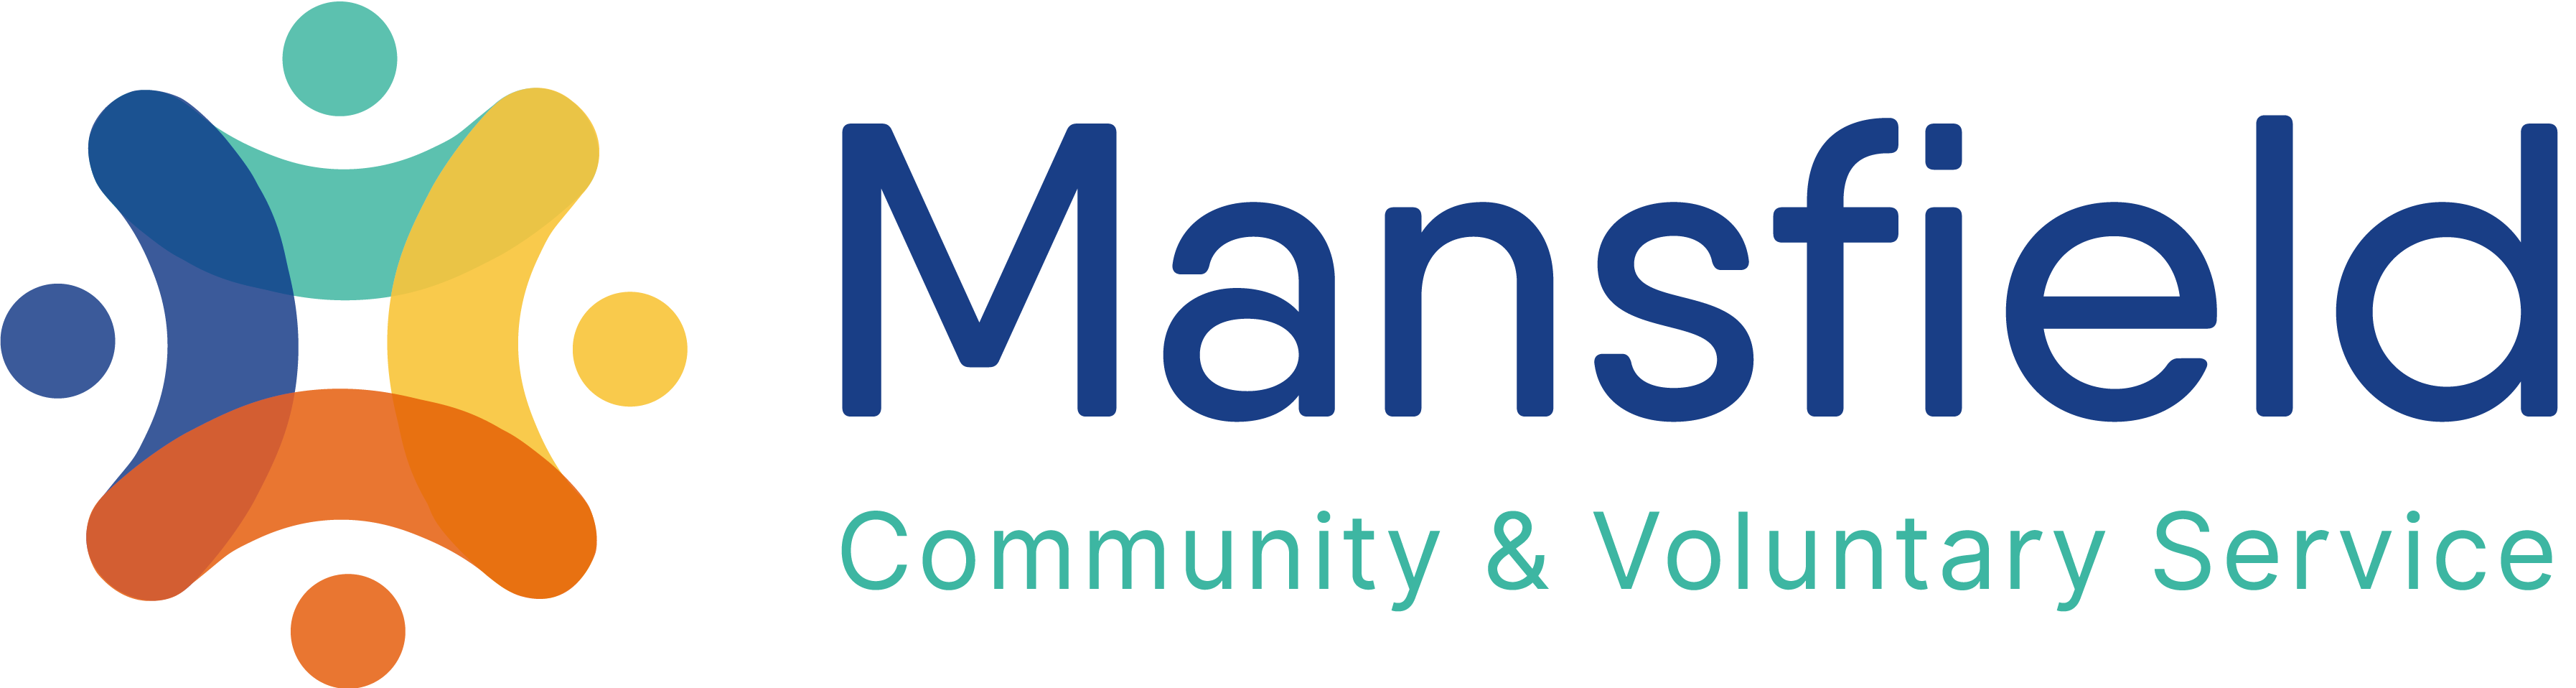 Mansfield Community and Voluntary Services (CVS)